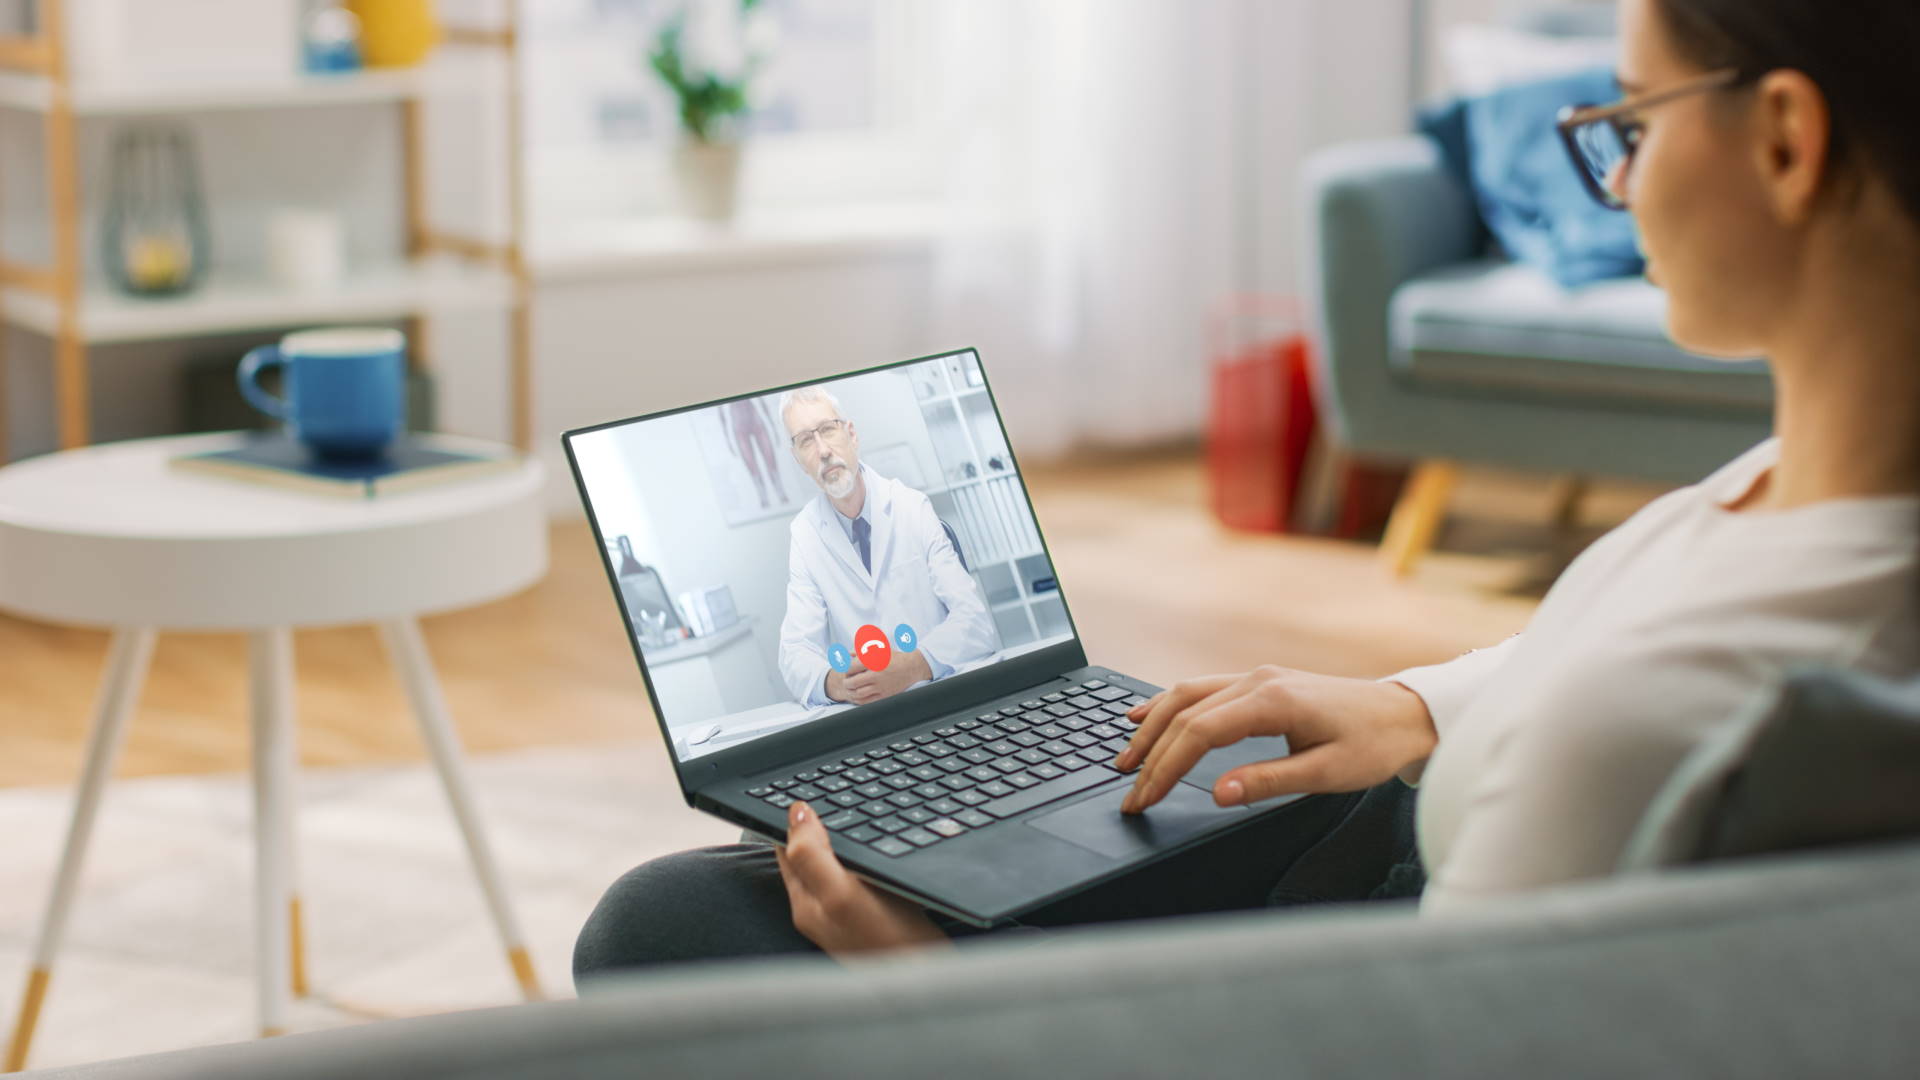 A woman sitting on a couch in a room talks with a doctor providing telemedicine services over a video call.